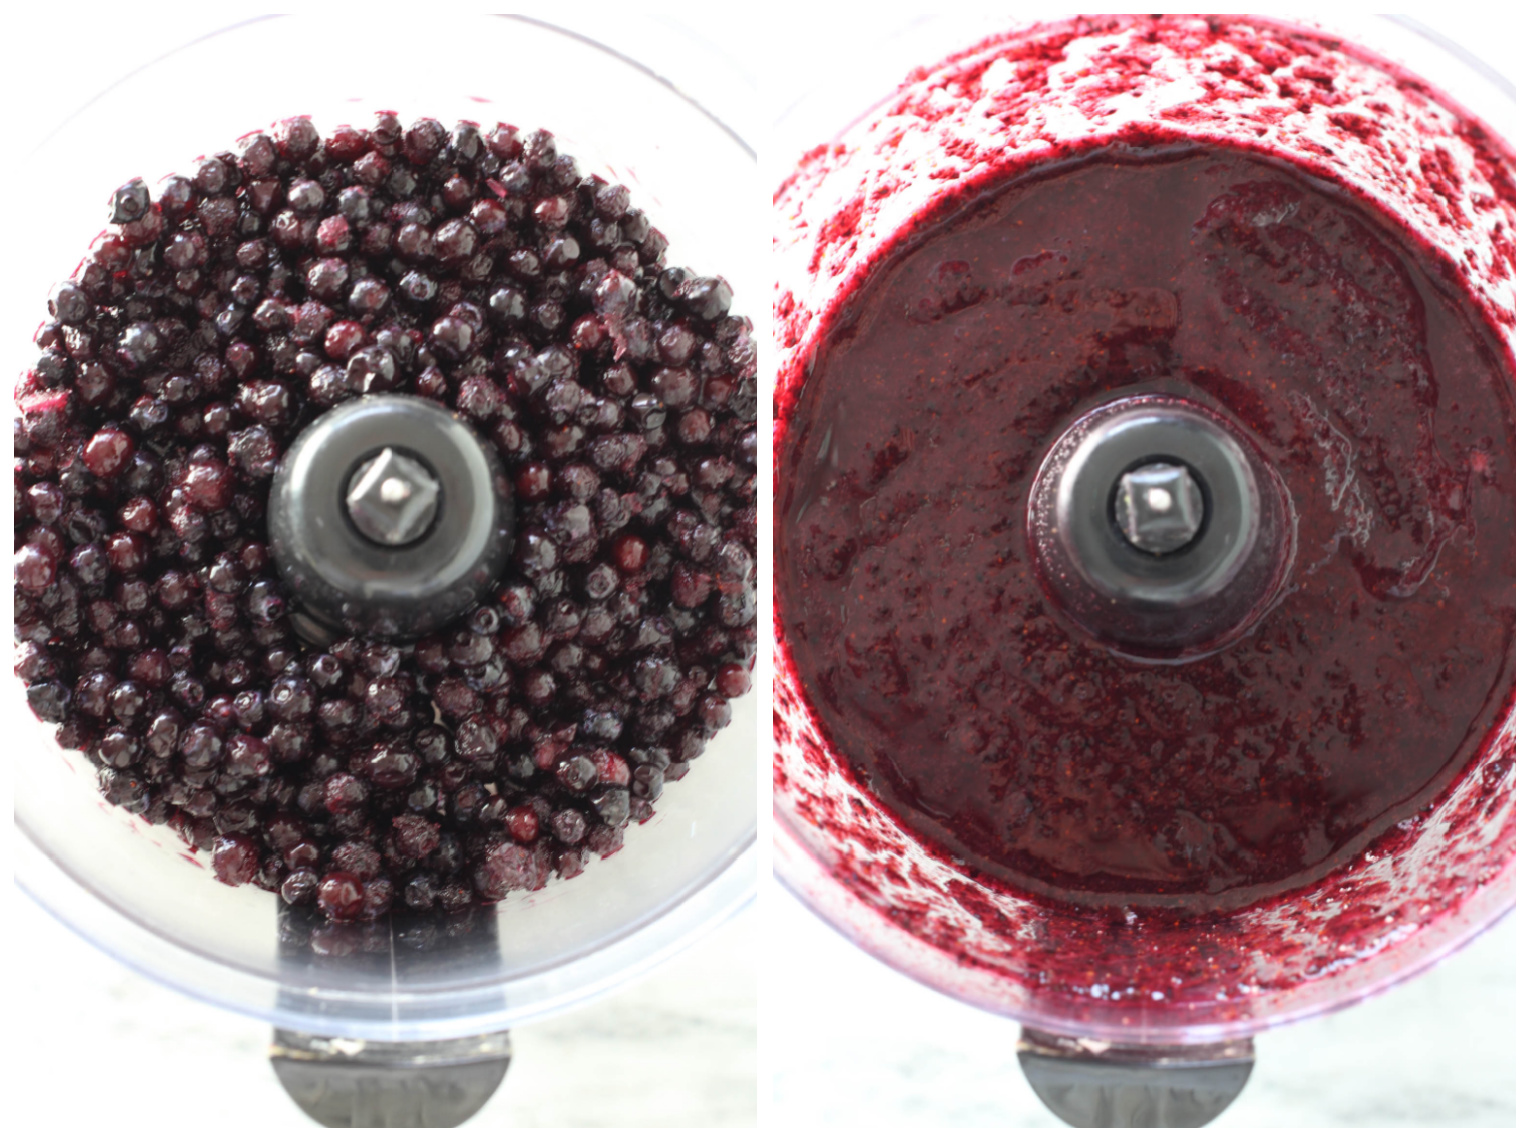 Two images side by side. On the left, whole blueberries in a food processor, on the right, blueberrie puree in a food processor.